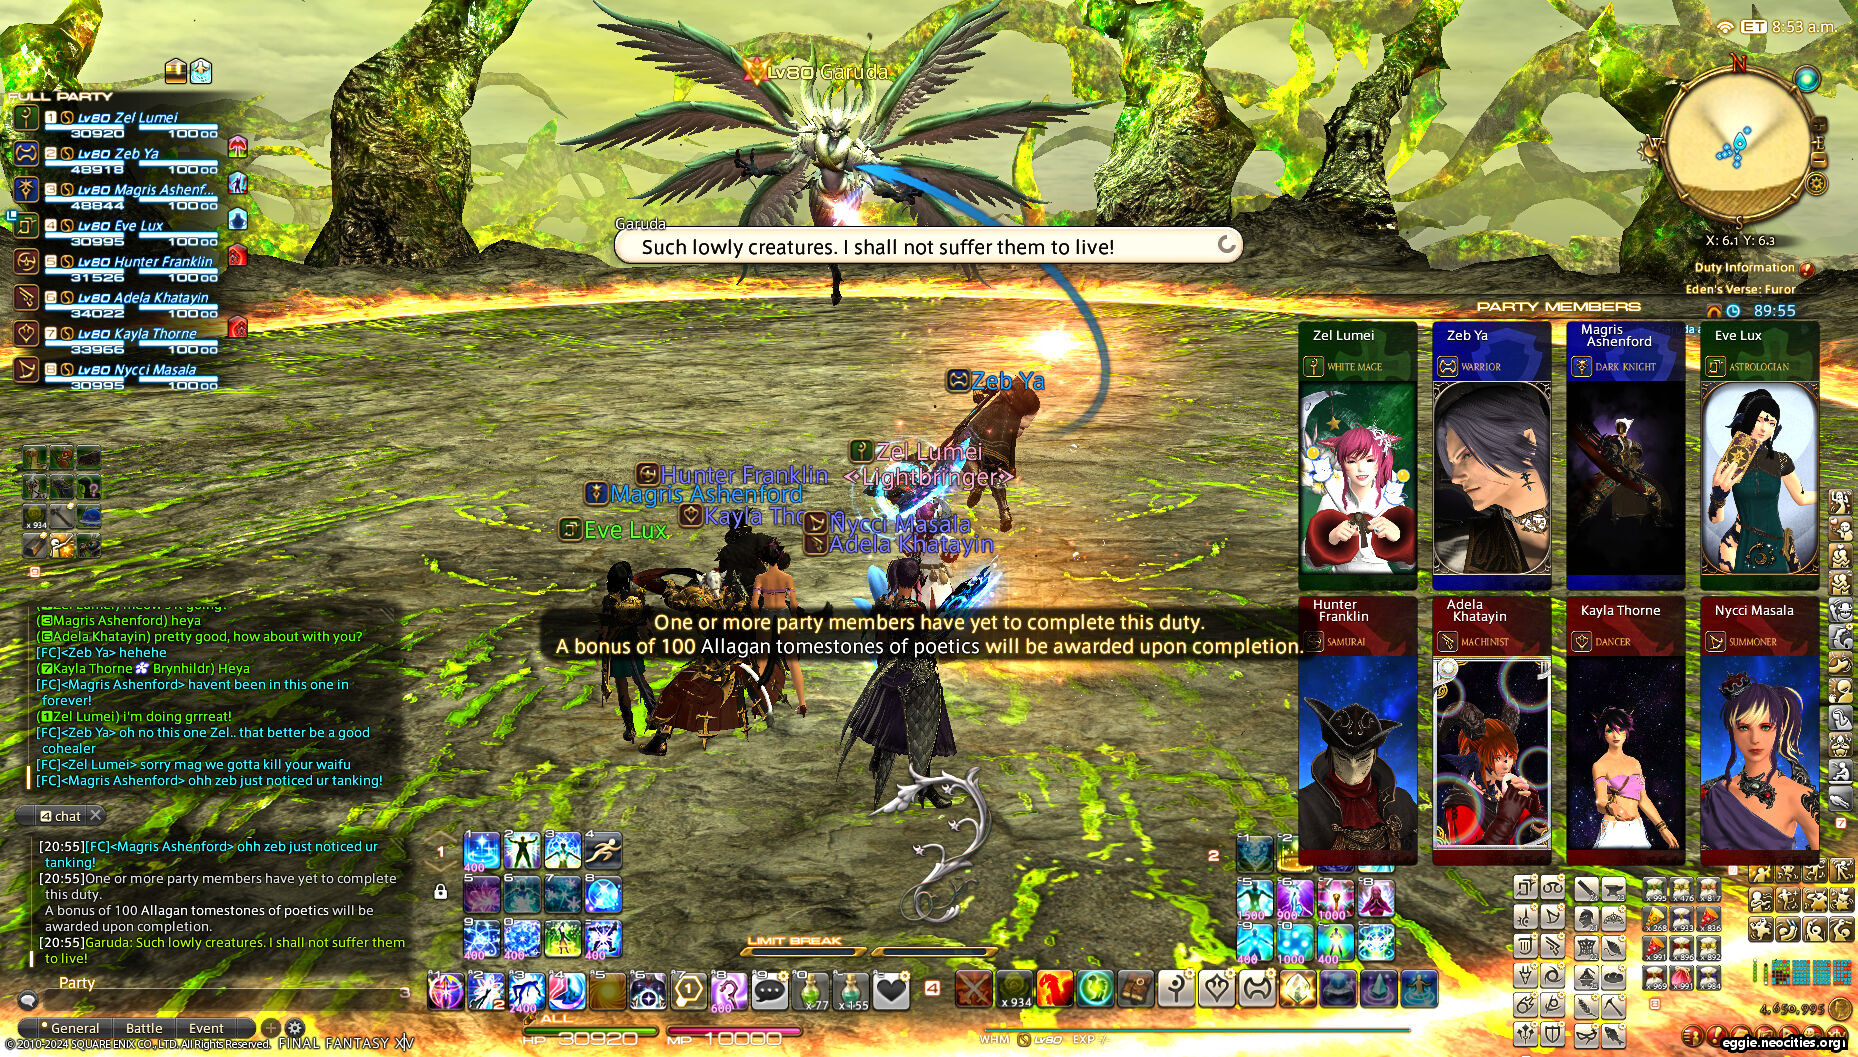 The party stands ready to take on Eden Garuda. Eggie's terrible UI is not hidden.